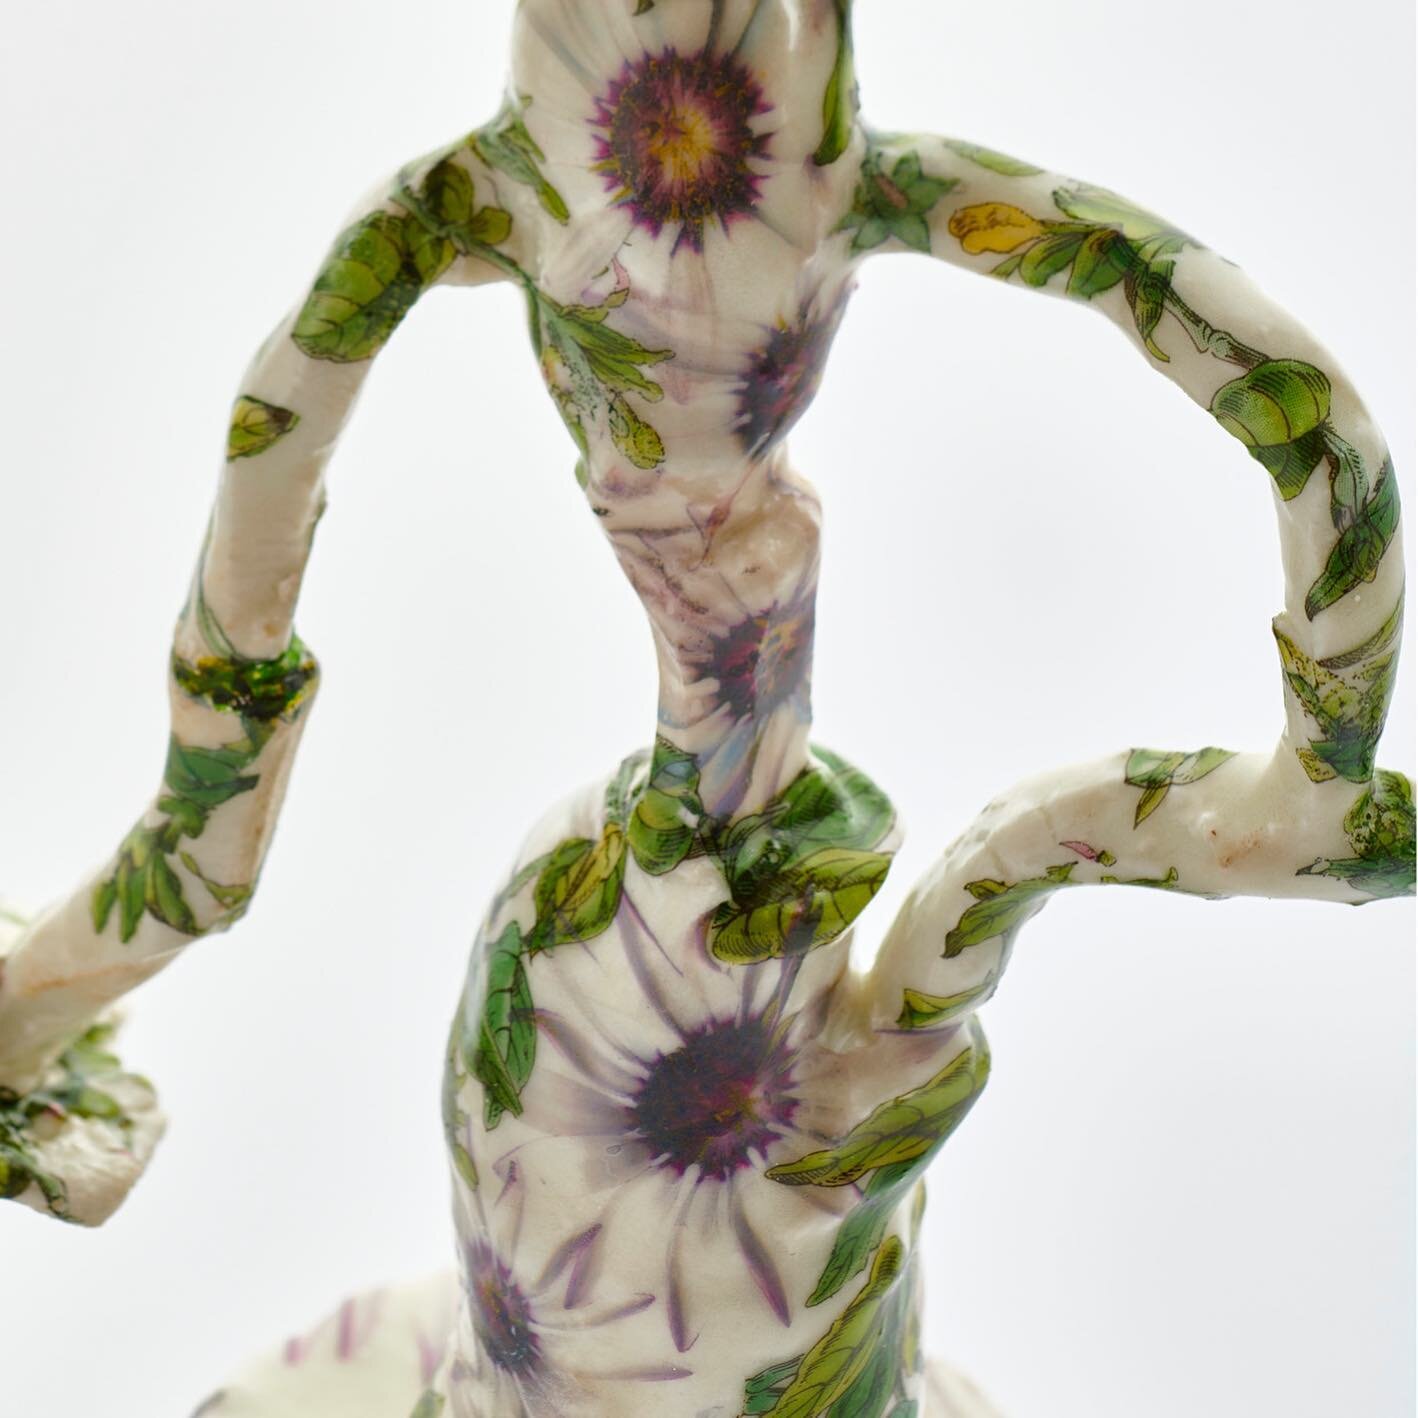 Daisies from my garden were made into decals for this candlestick. Swipe to see the whole thing. 
This one is showcased in Dover Street Market London, the retail arm of Commerce des Gar&ccedil;ons, temporarily closed. Other candlesticks are for sale 